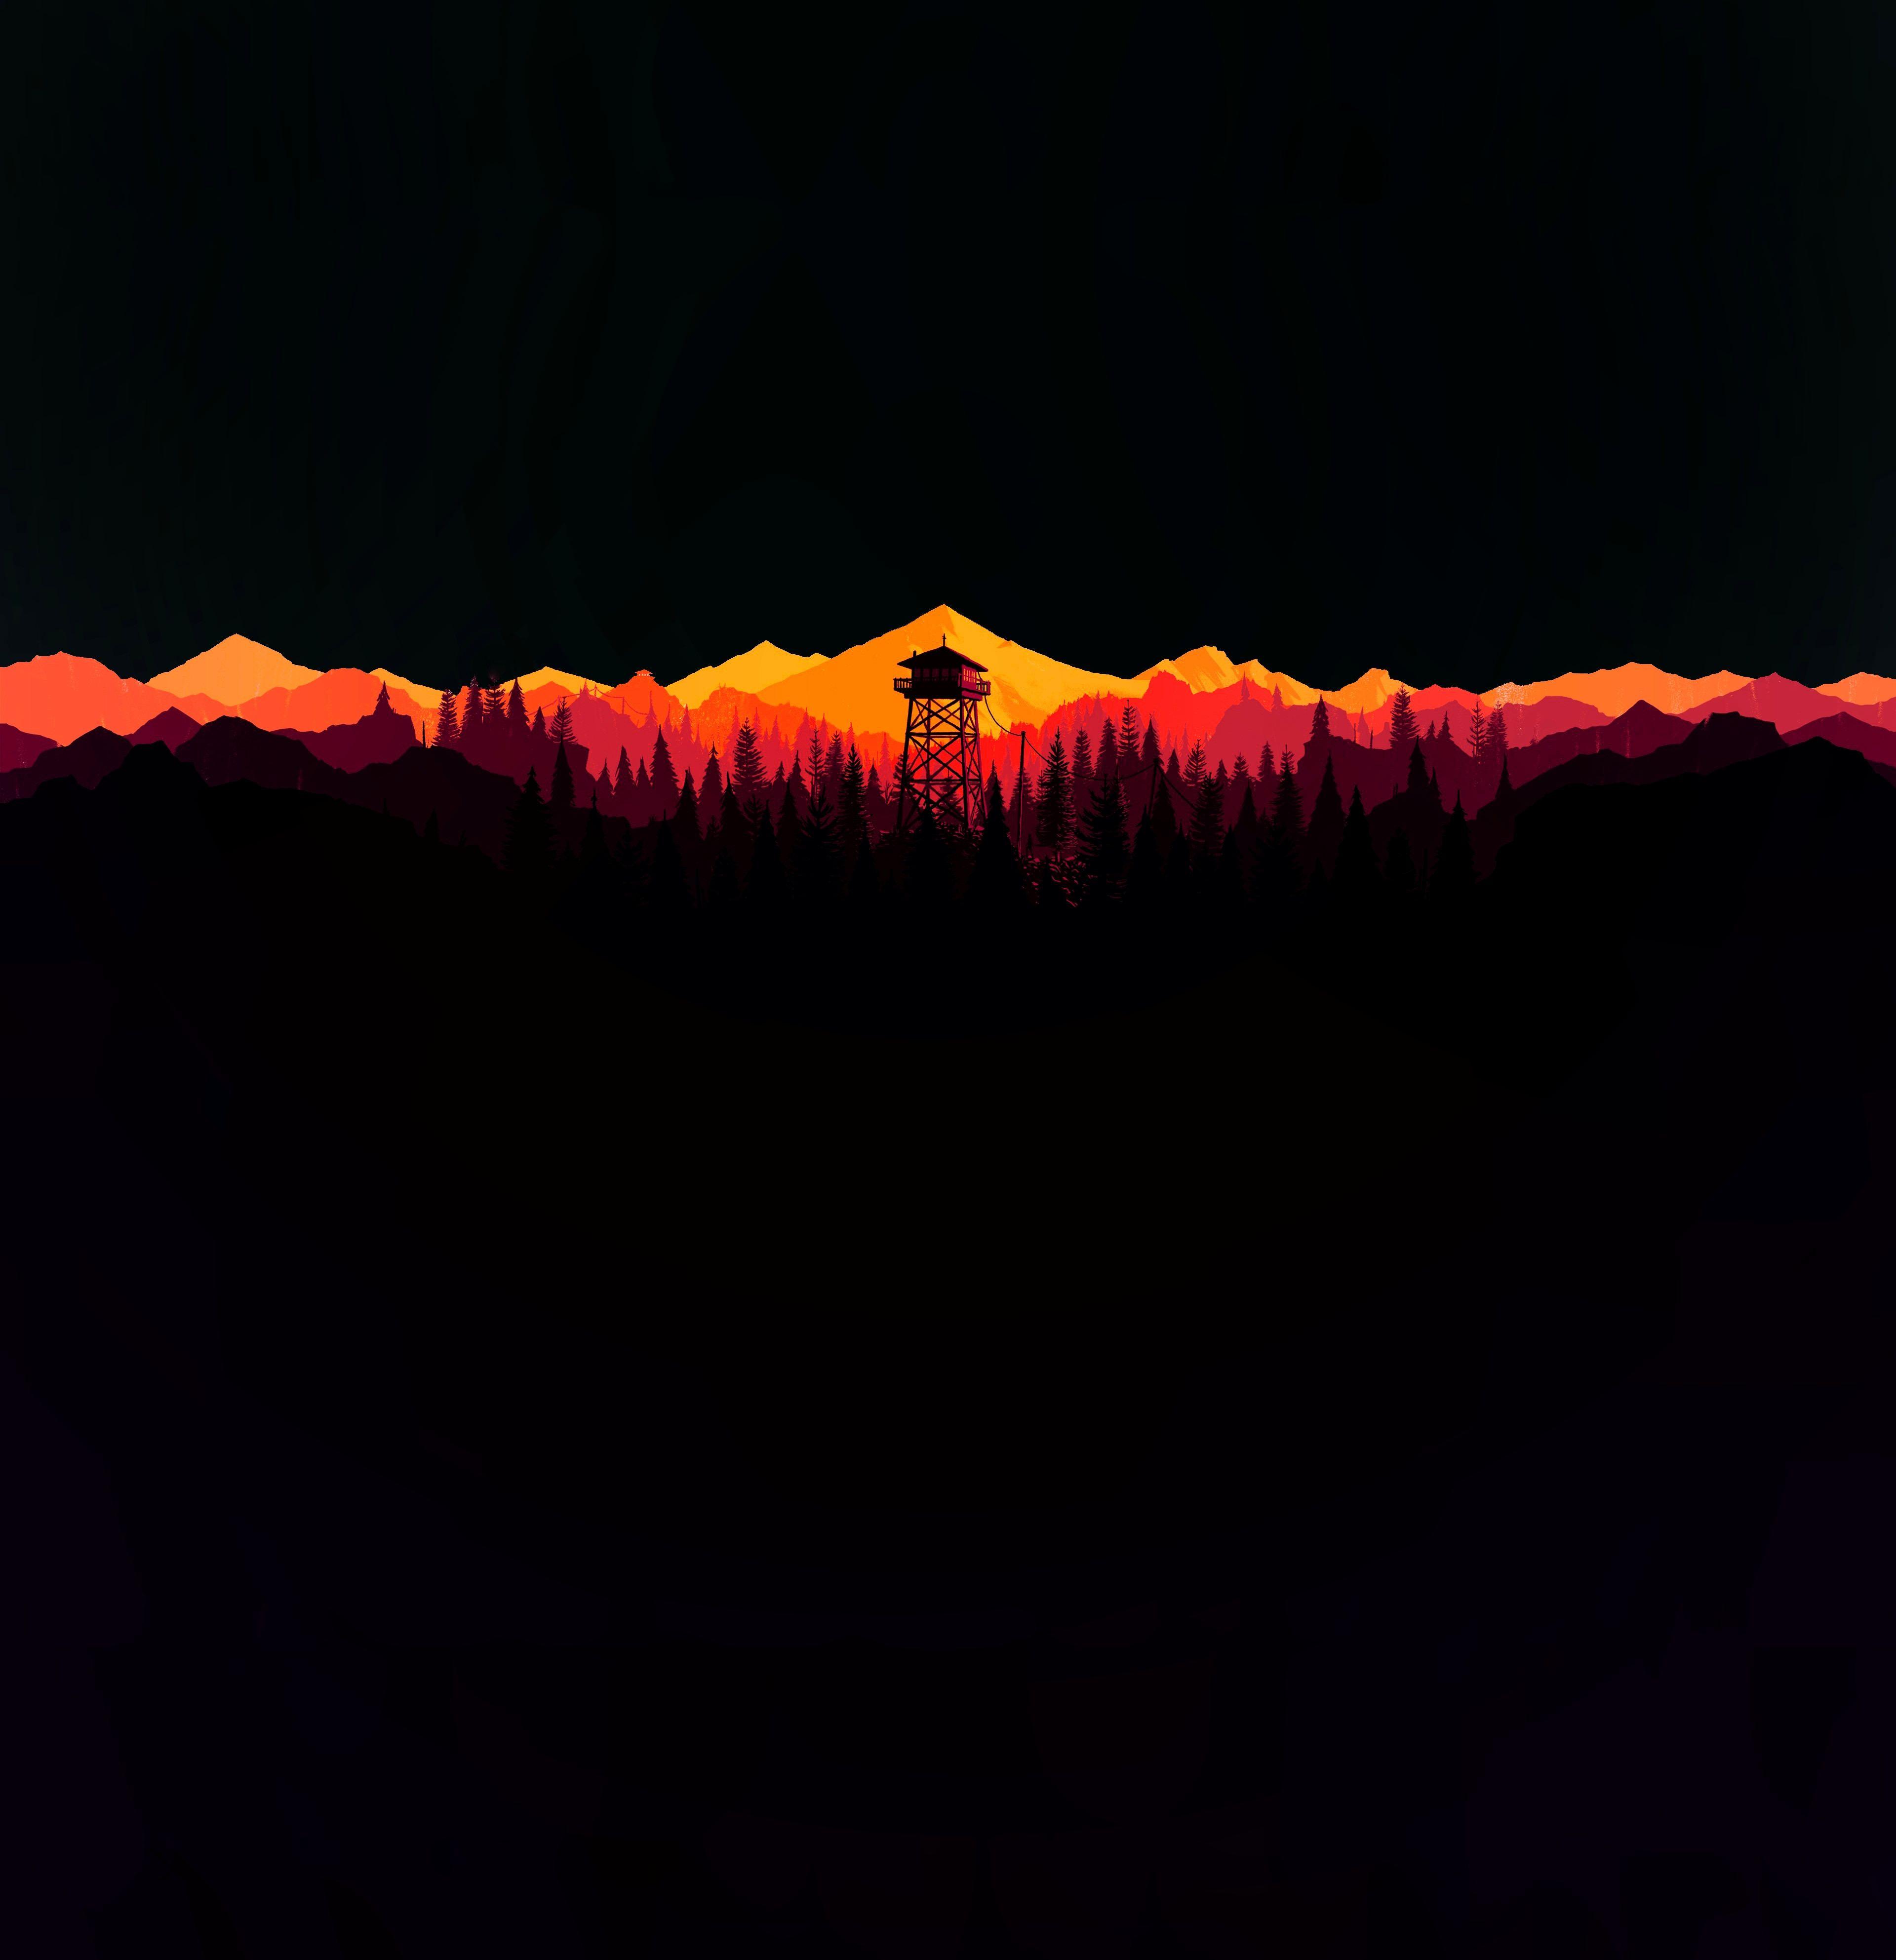 Self Edited Watchtower Wallpaper For OLED Devices. Stunning